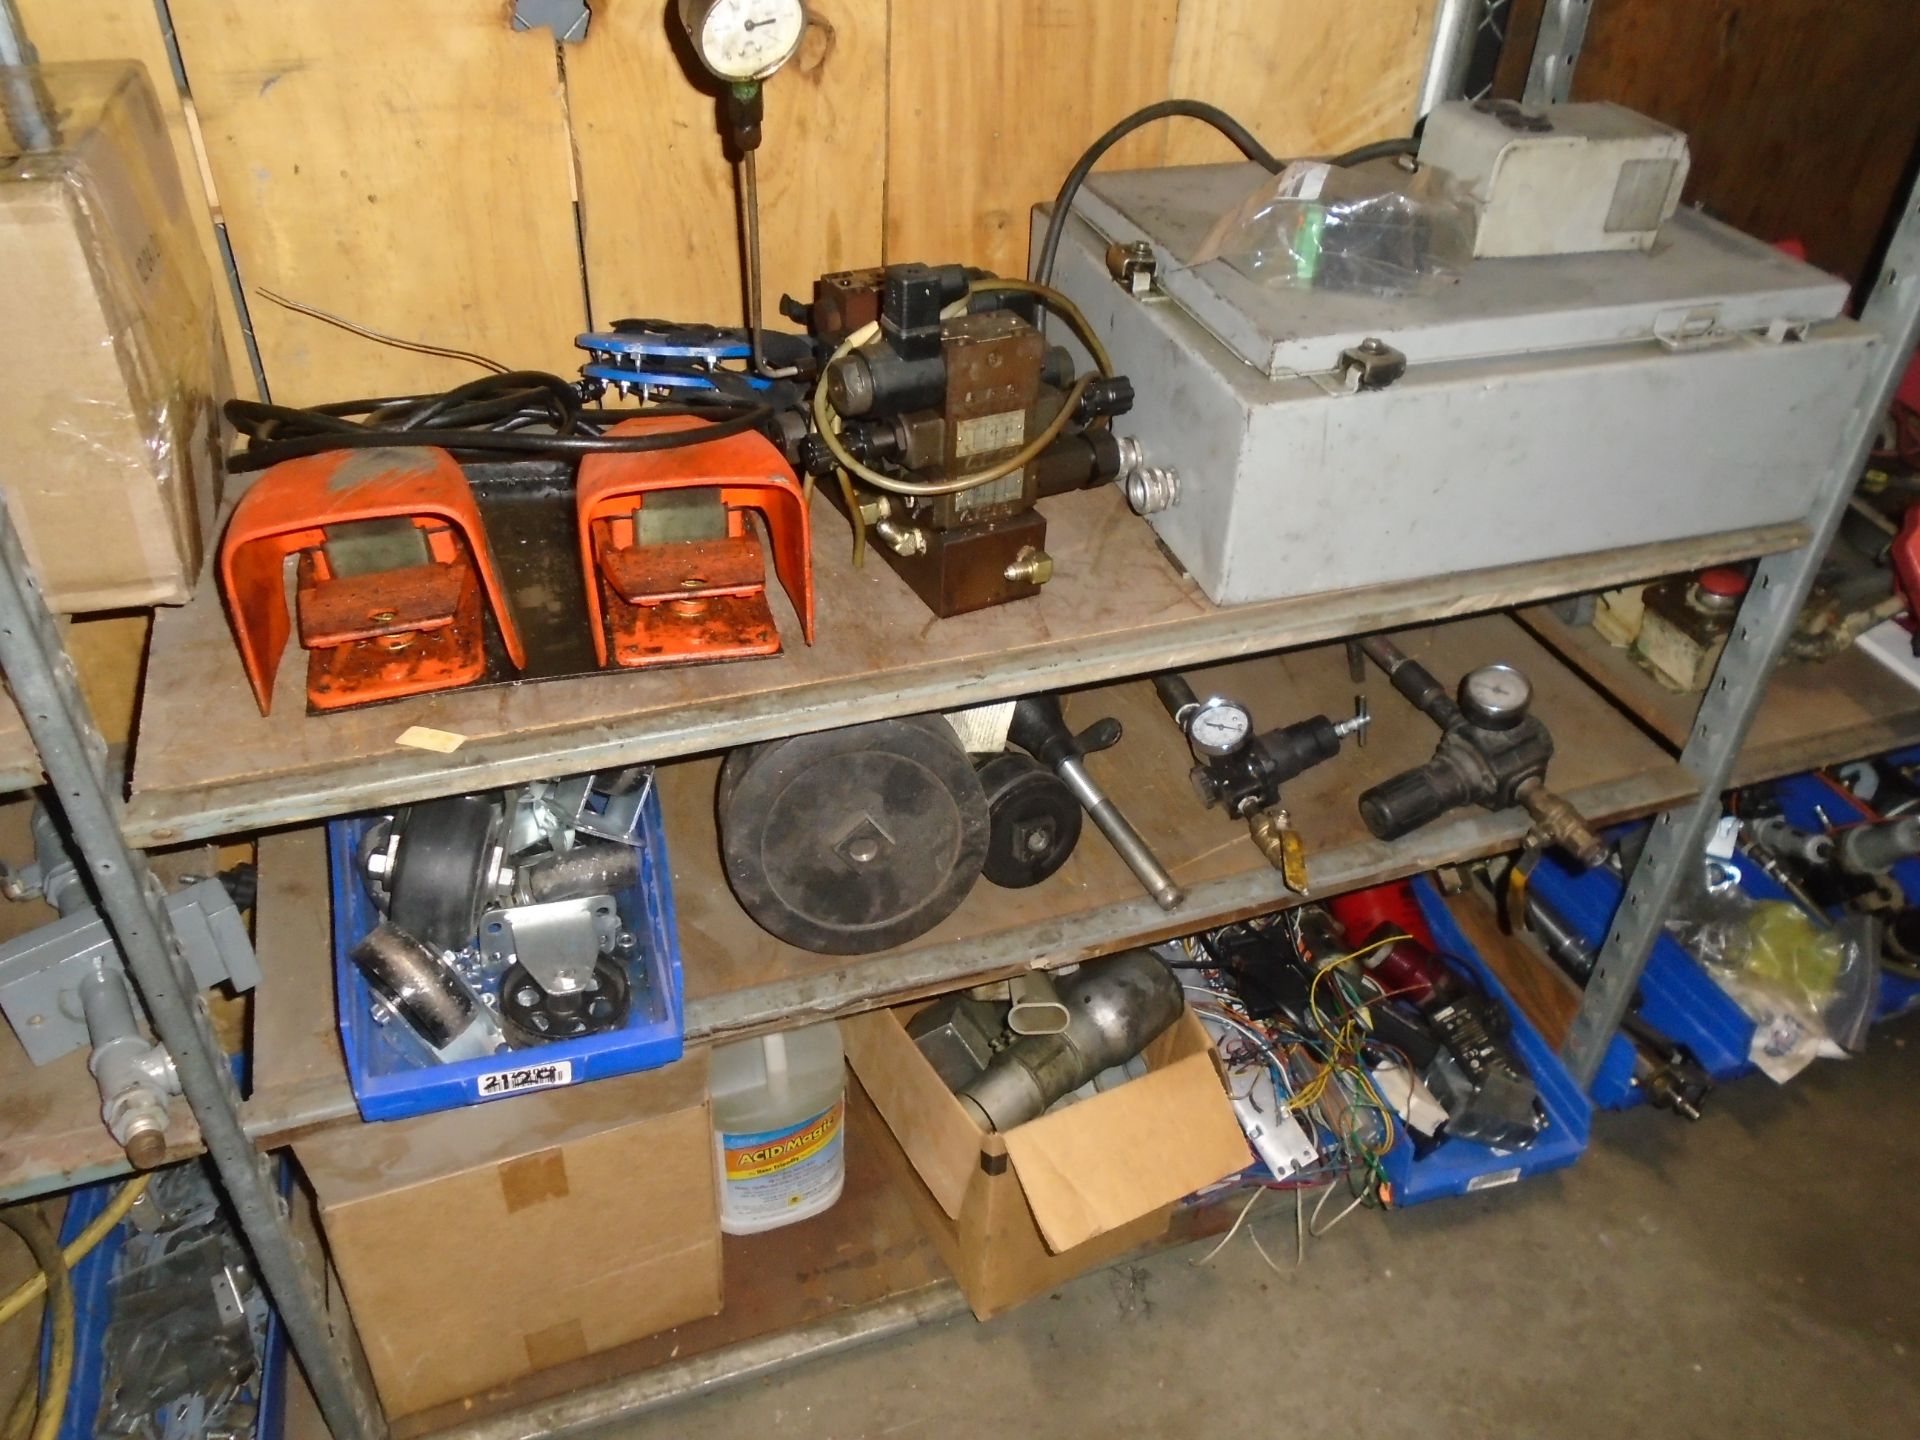 Electrical Components, Staters, Timers, Switches, Disconnecting Boxes For CNC Lathe & Mills - Image 10 of 12